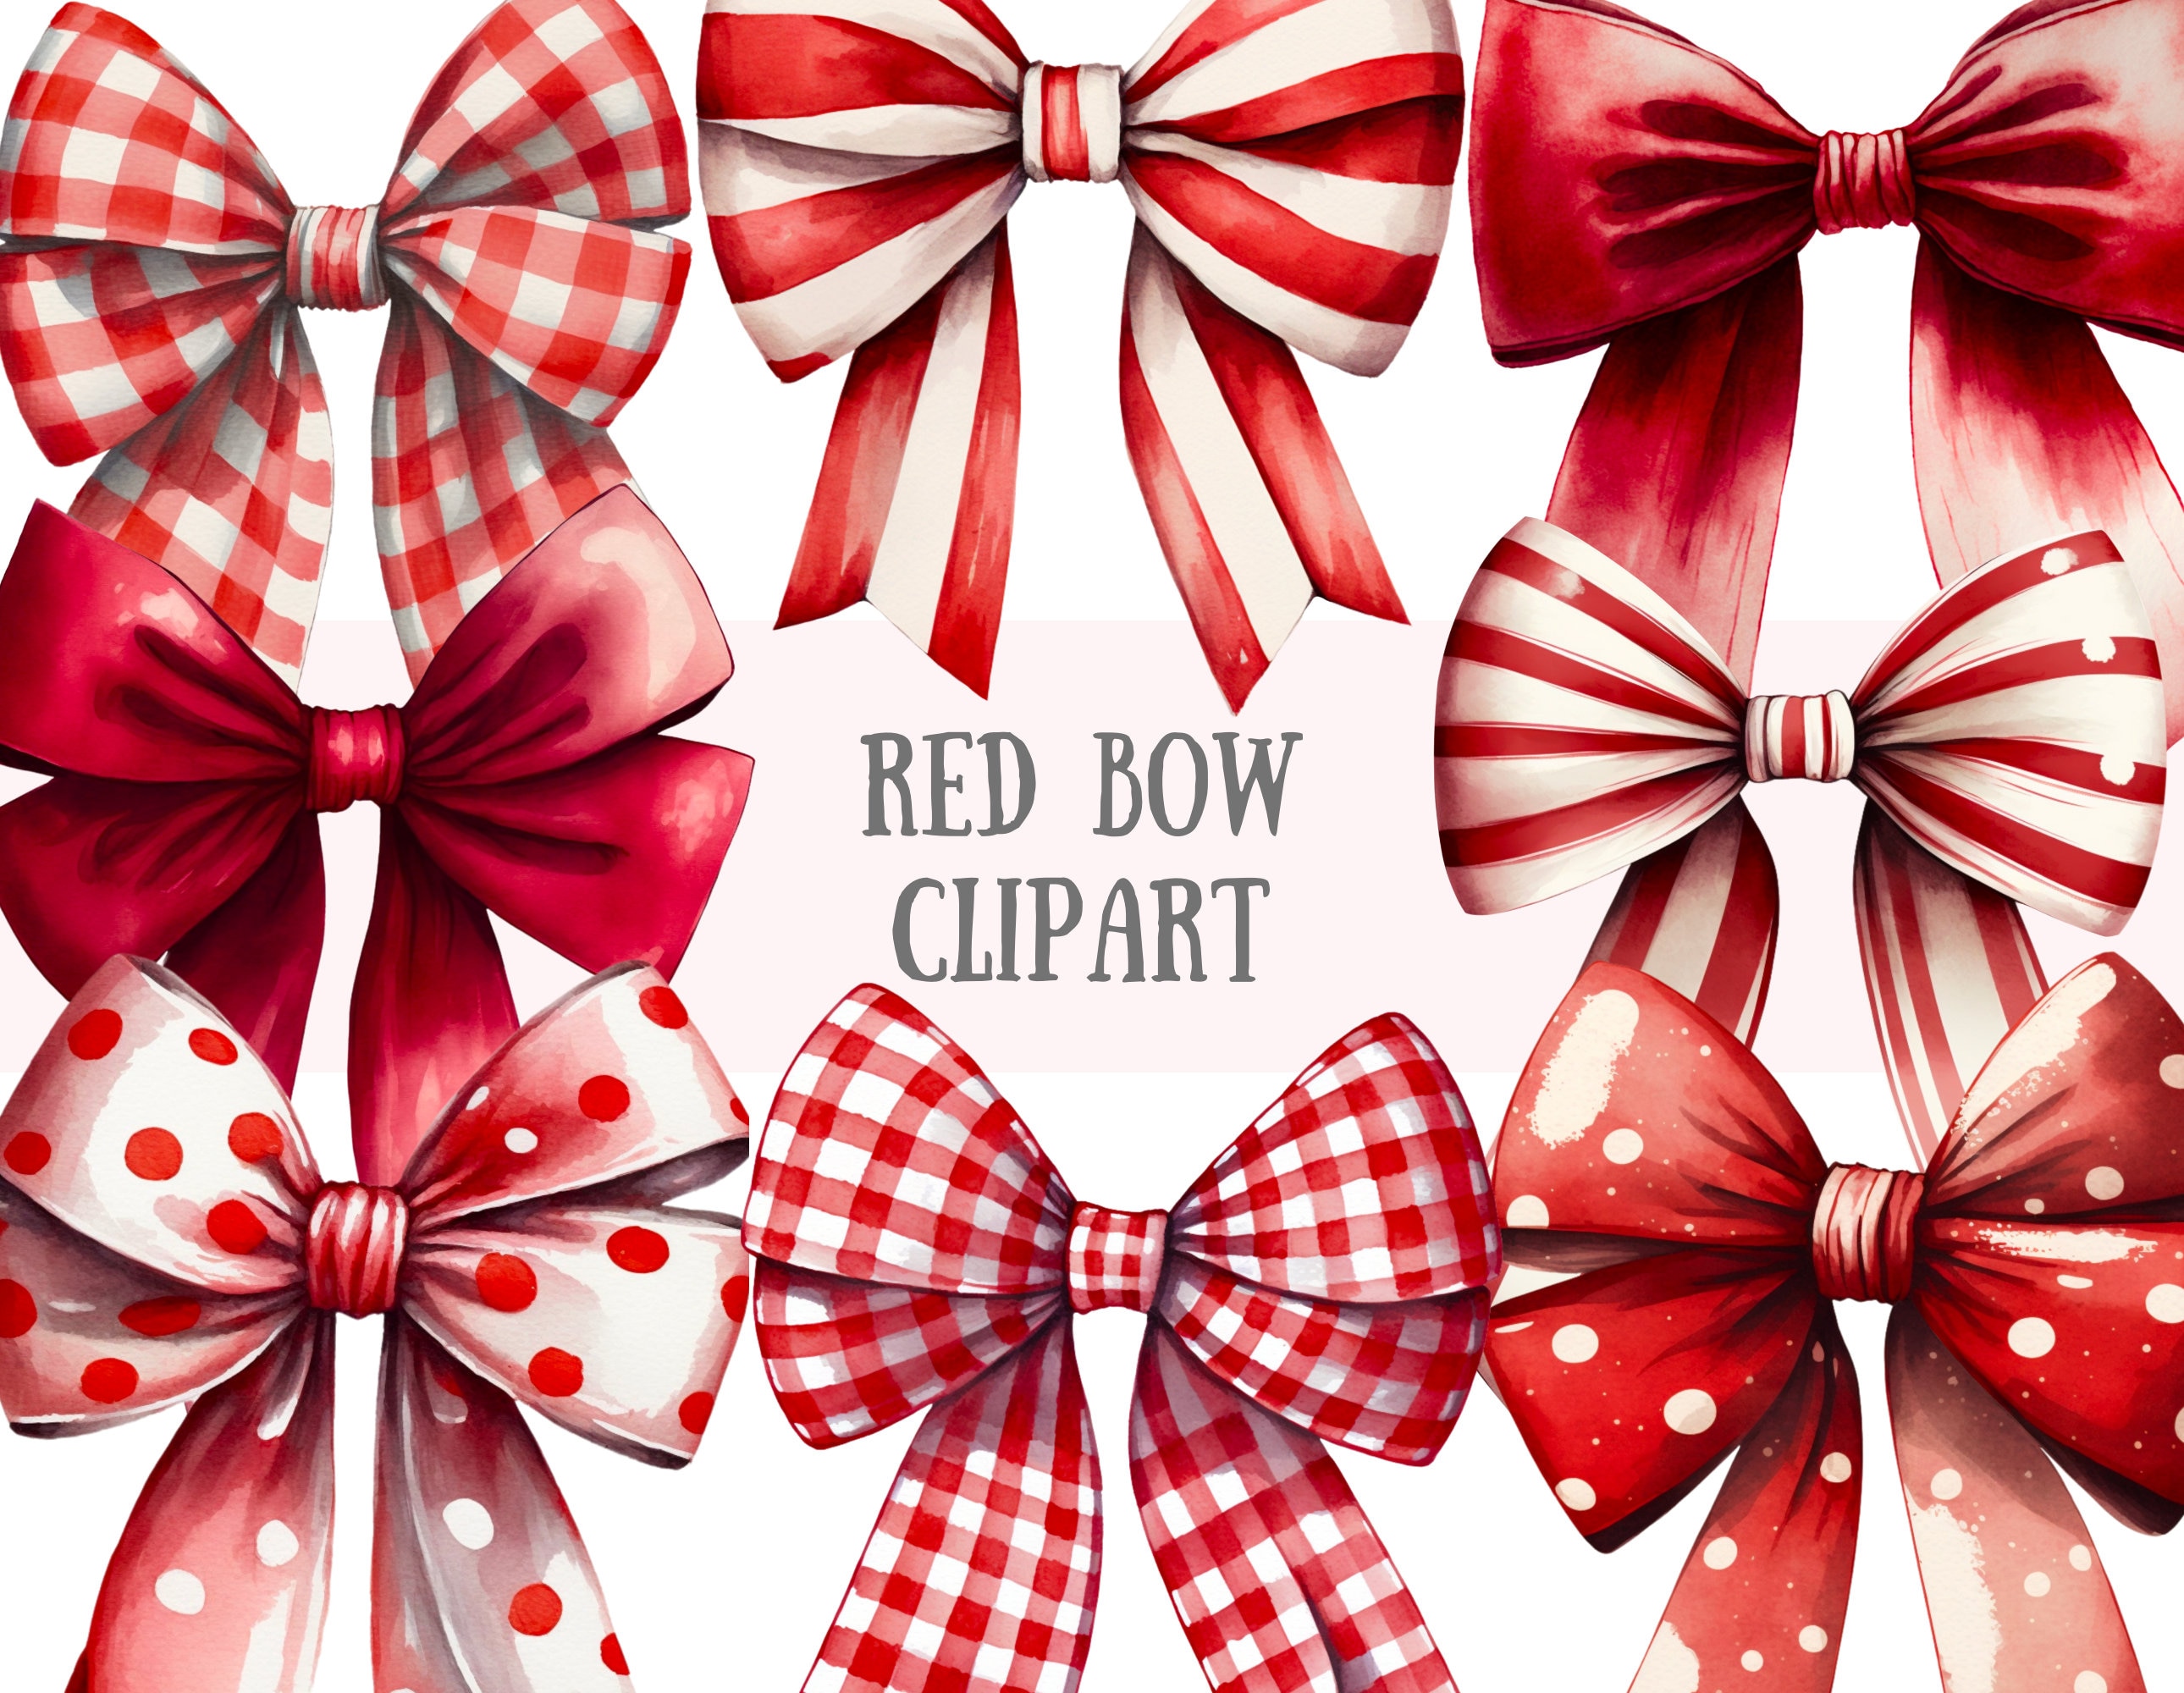 Valentines Bow Clipart Vector, Valentines Day Gift Box Bow Decoration Ribbon  Material, Ribbon, Valentine S Day, Red Bow PNG Image For Free Download